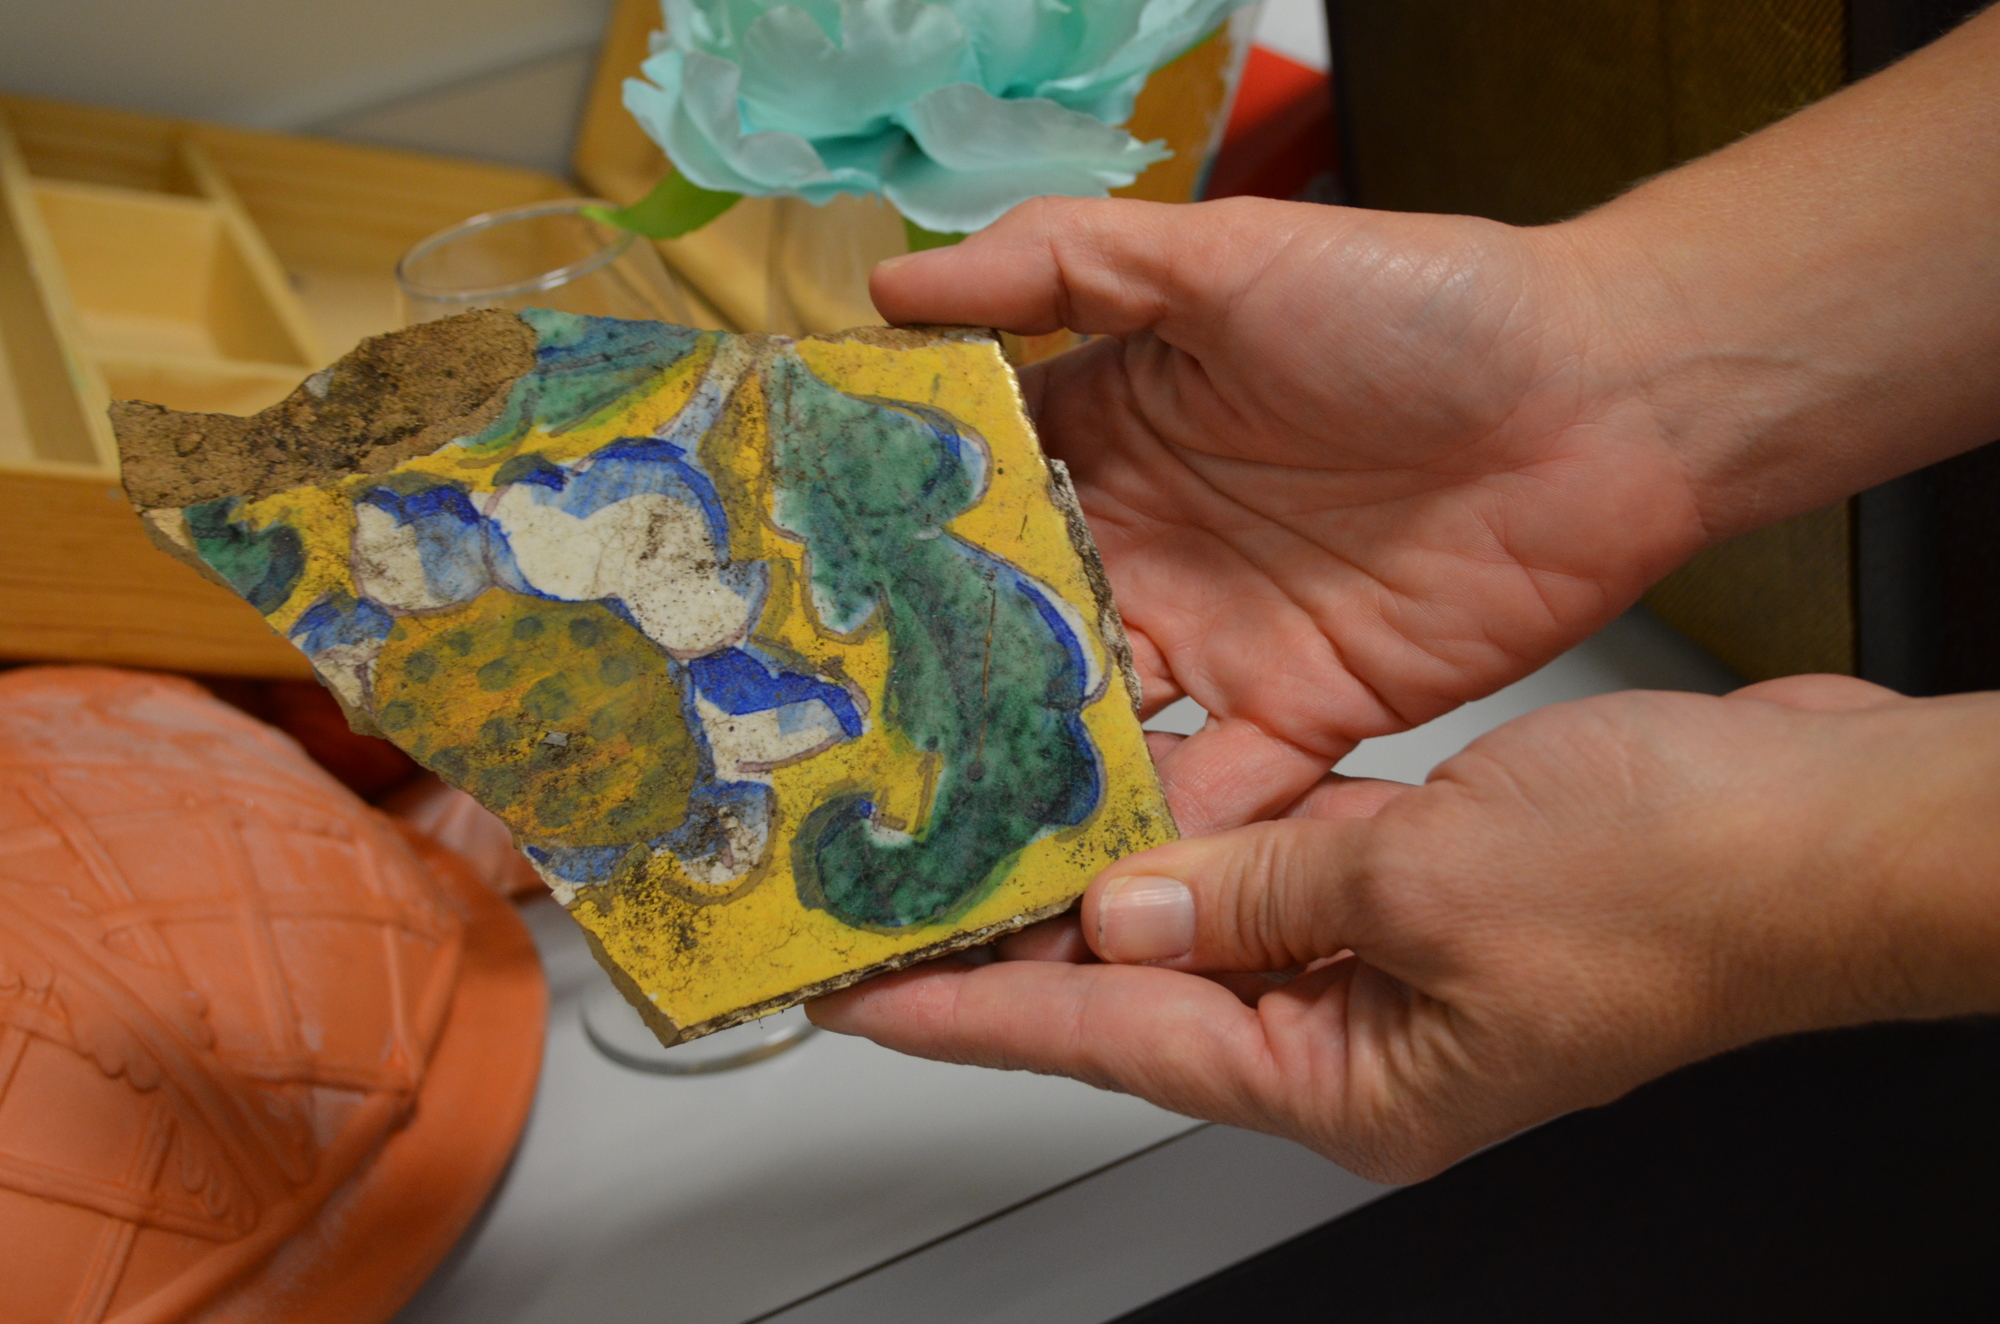 In preparing for MASHterpieces, Fraser and The Ringling employees discovered historic items in storage, including pieces of broken ceramic tile.